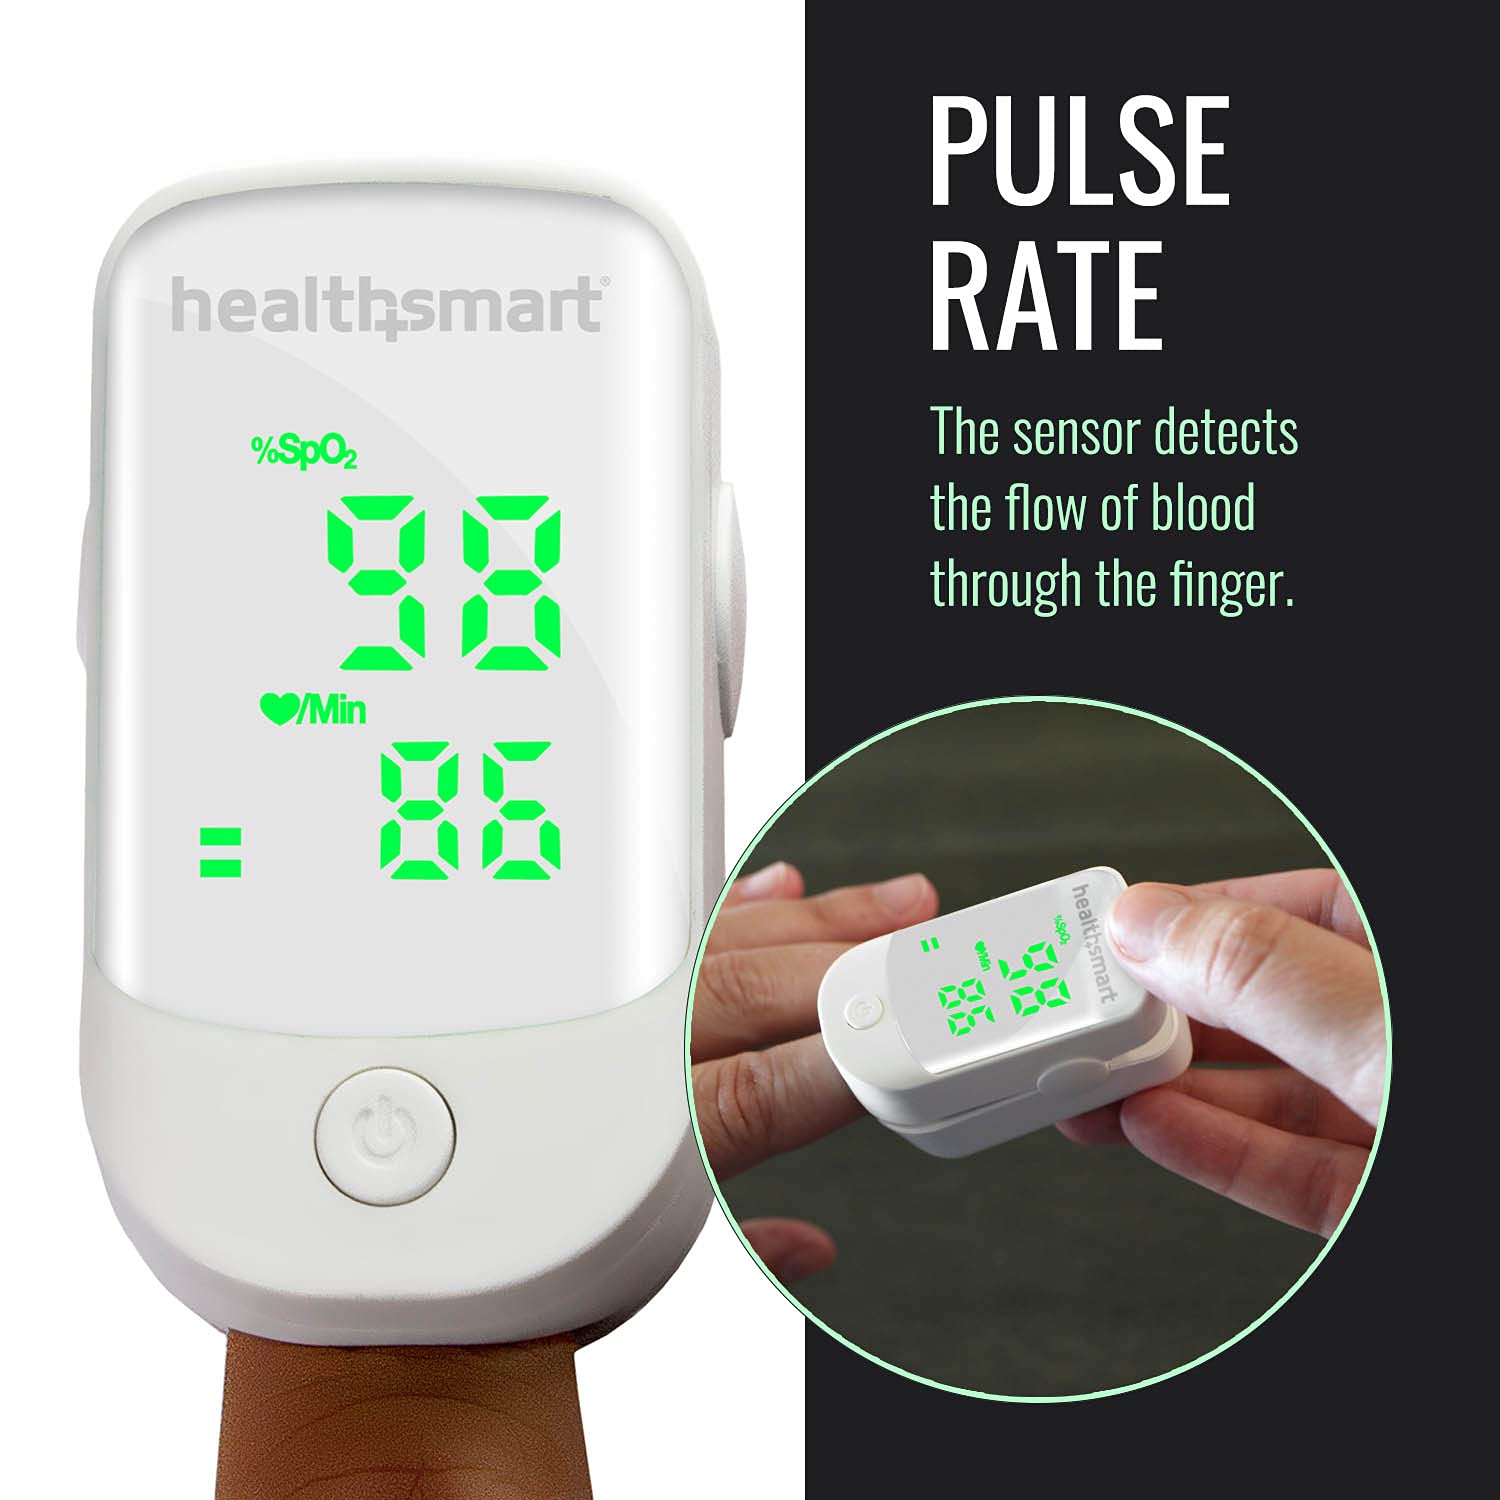 HealthSmart Pulse Oximeter for Fingertip That Displays Blood Oxygen Saturation Content, Pulse Rate and Pulse Bar with LED Display, Accurate and Reliable, Green LED Display